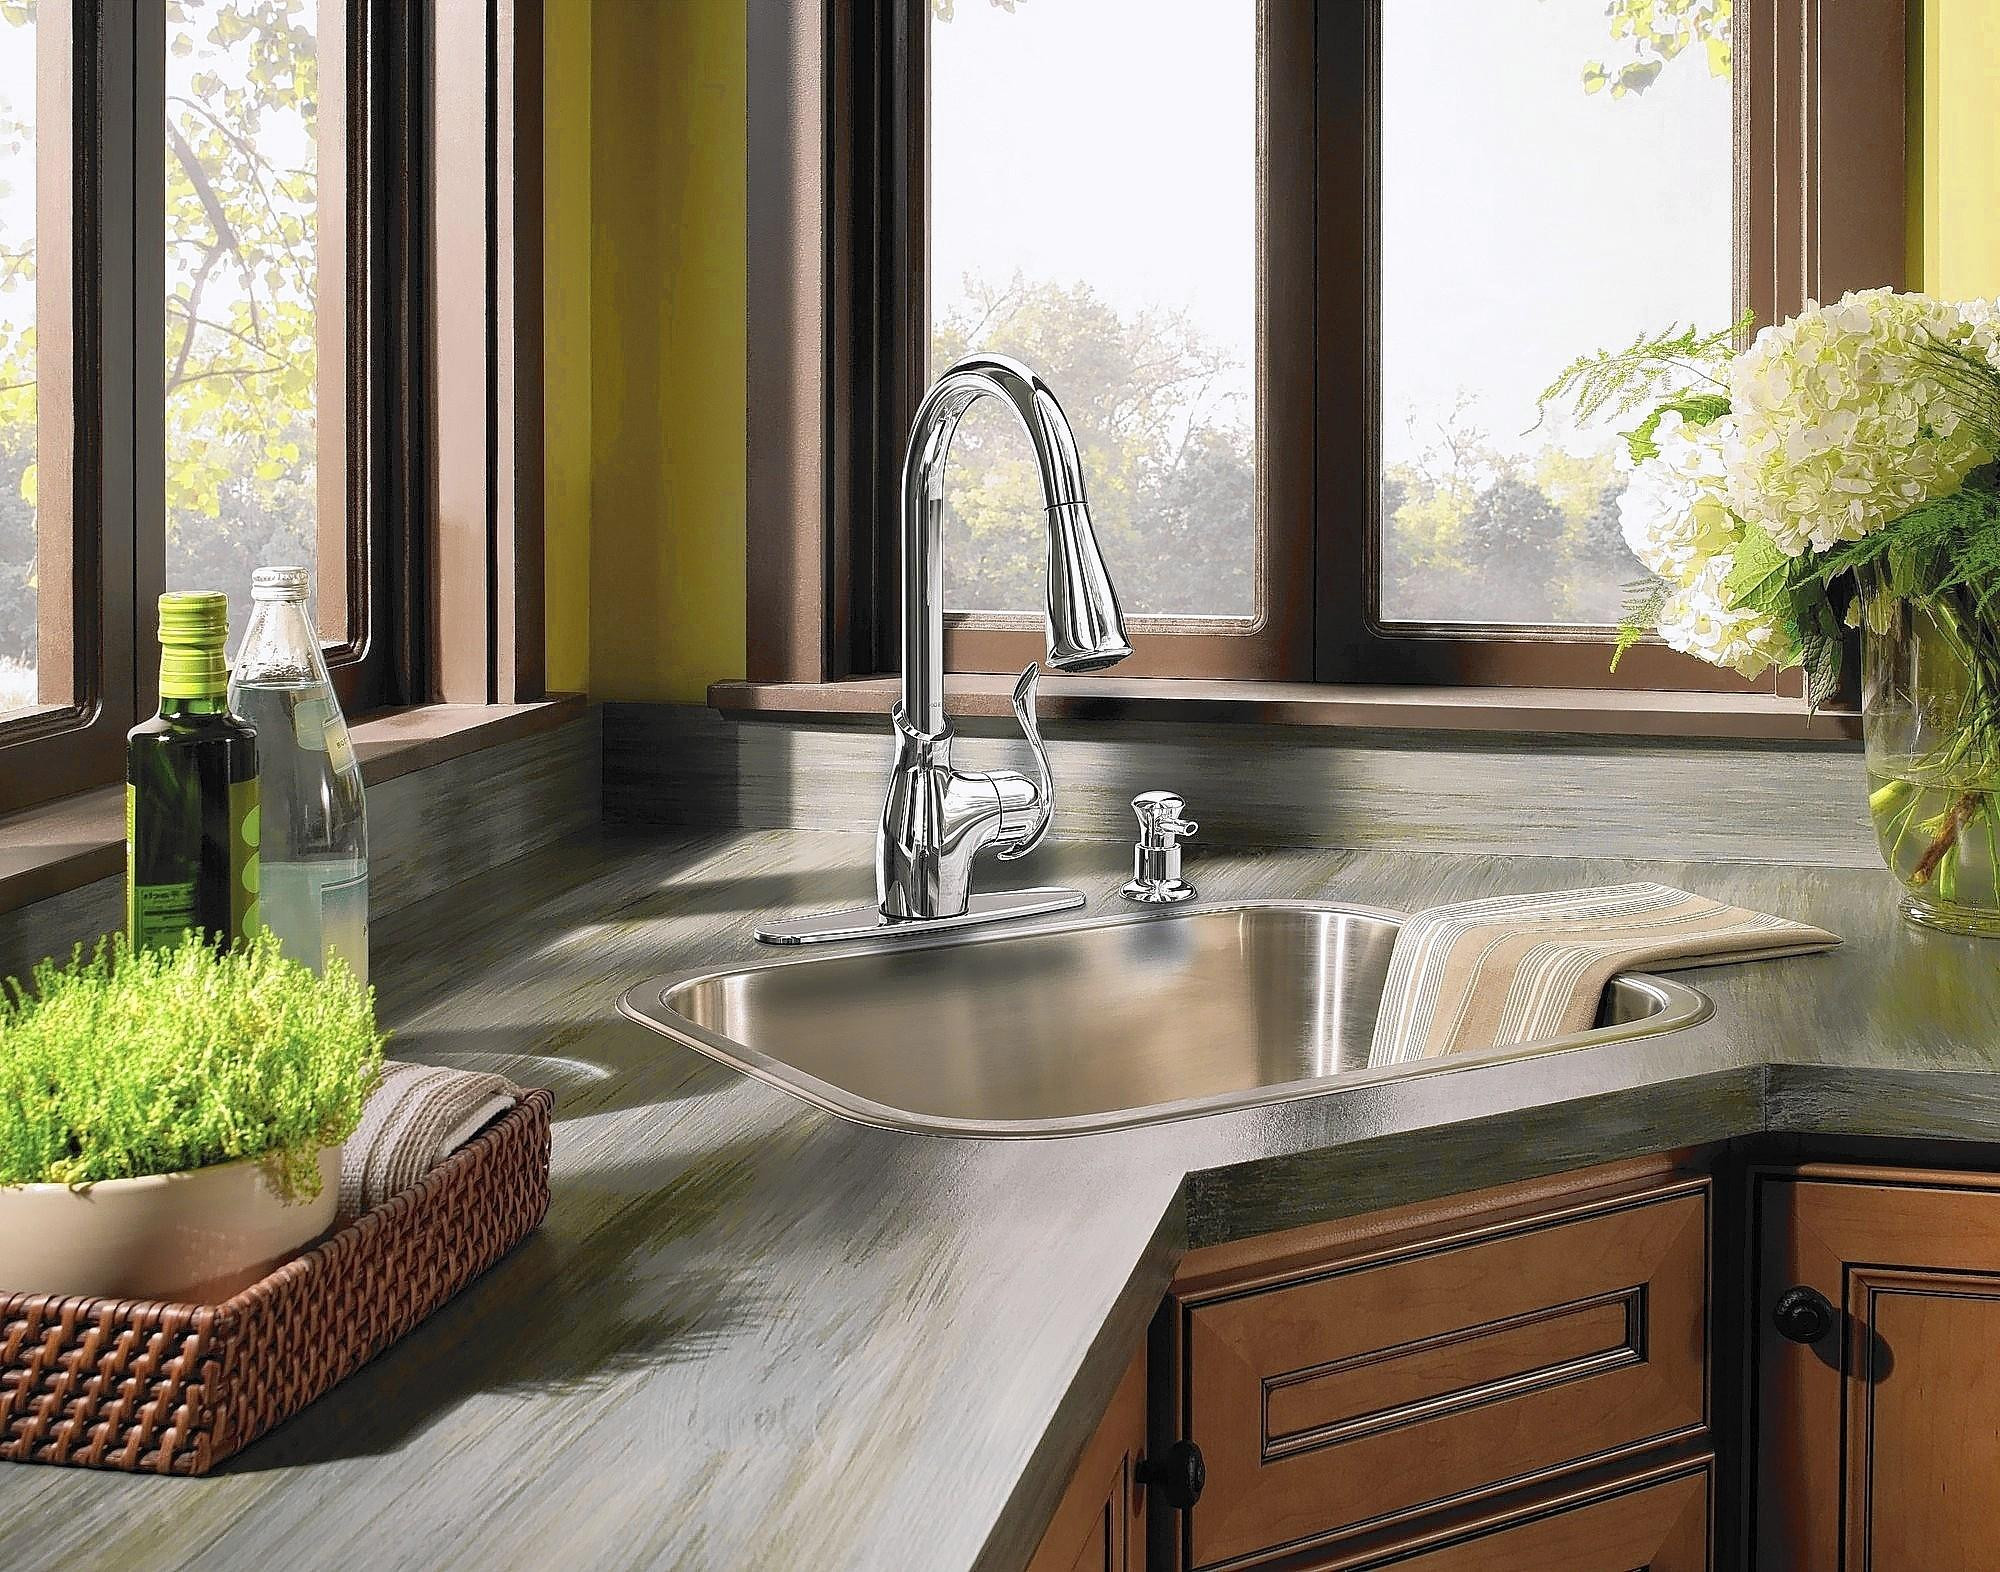 best kitchen sink material that wont stain at all